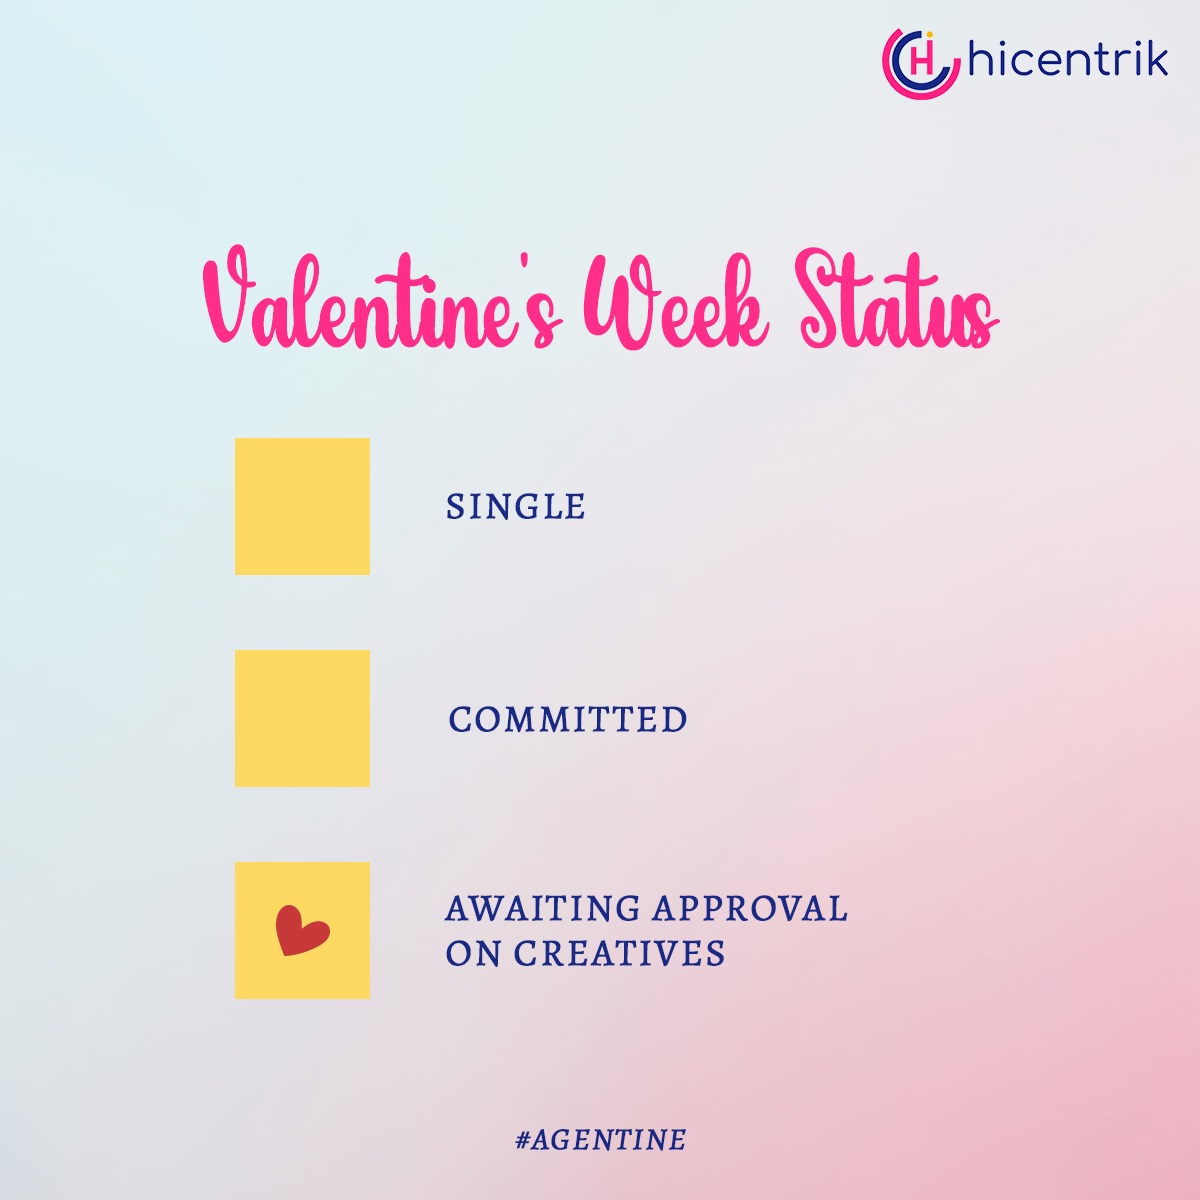 Just another day at the office for us, your dedicated marketing agency! 💼❤️ #MarketingLove #ValentineWeek #Valentinesday #Marketingagency #hicentrik #Clientdiaries #agencylife #topicalpost